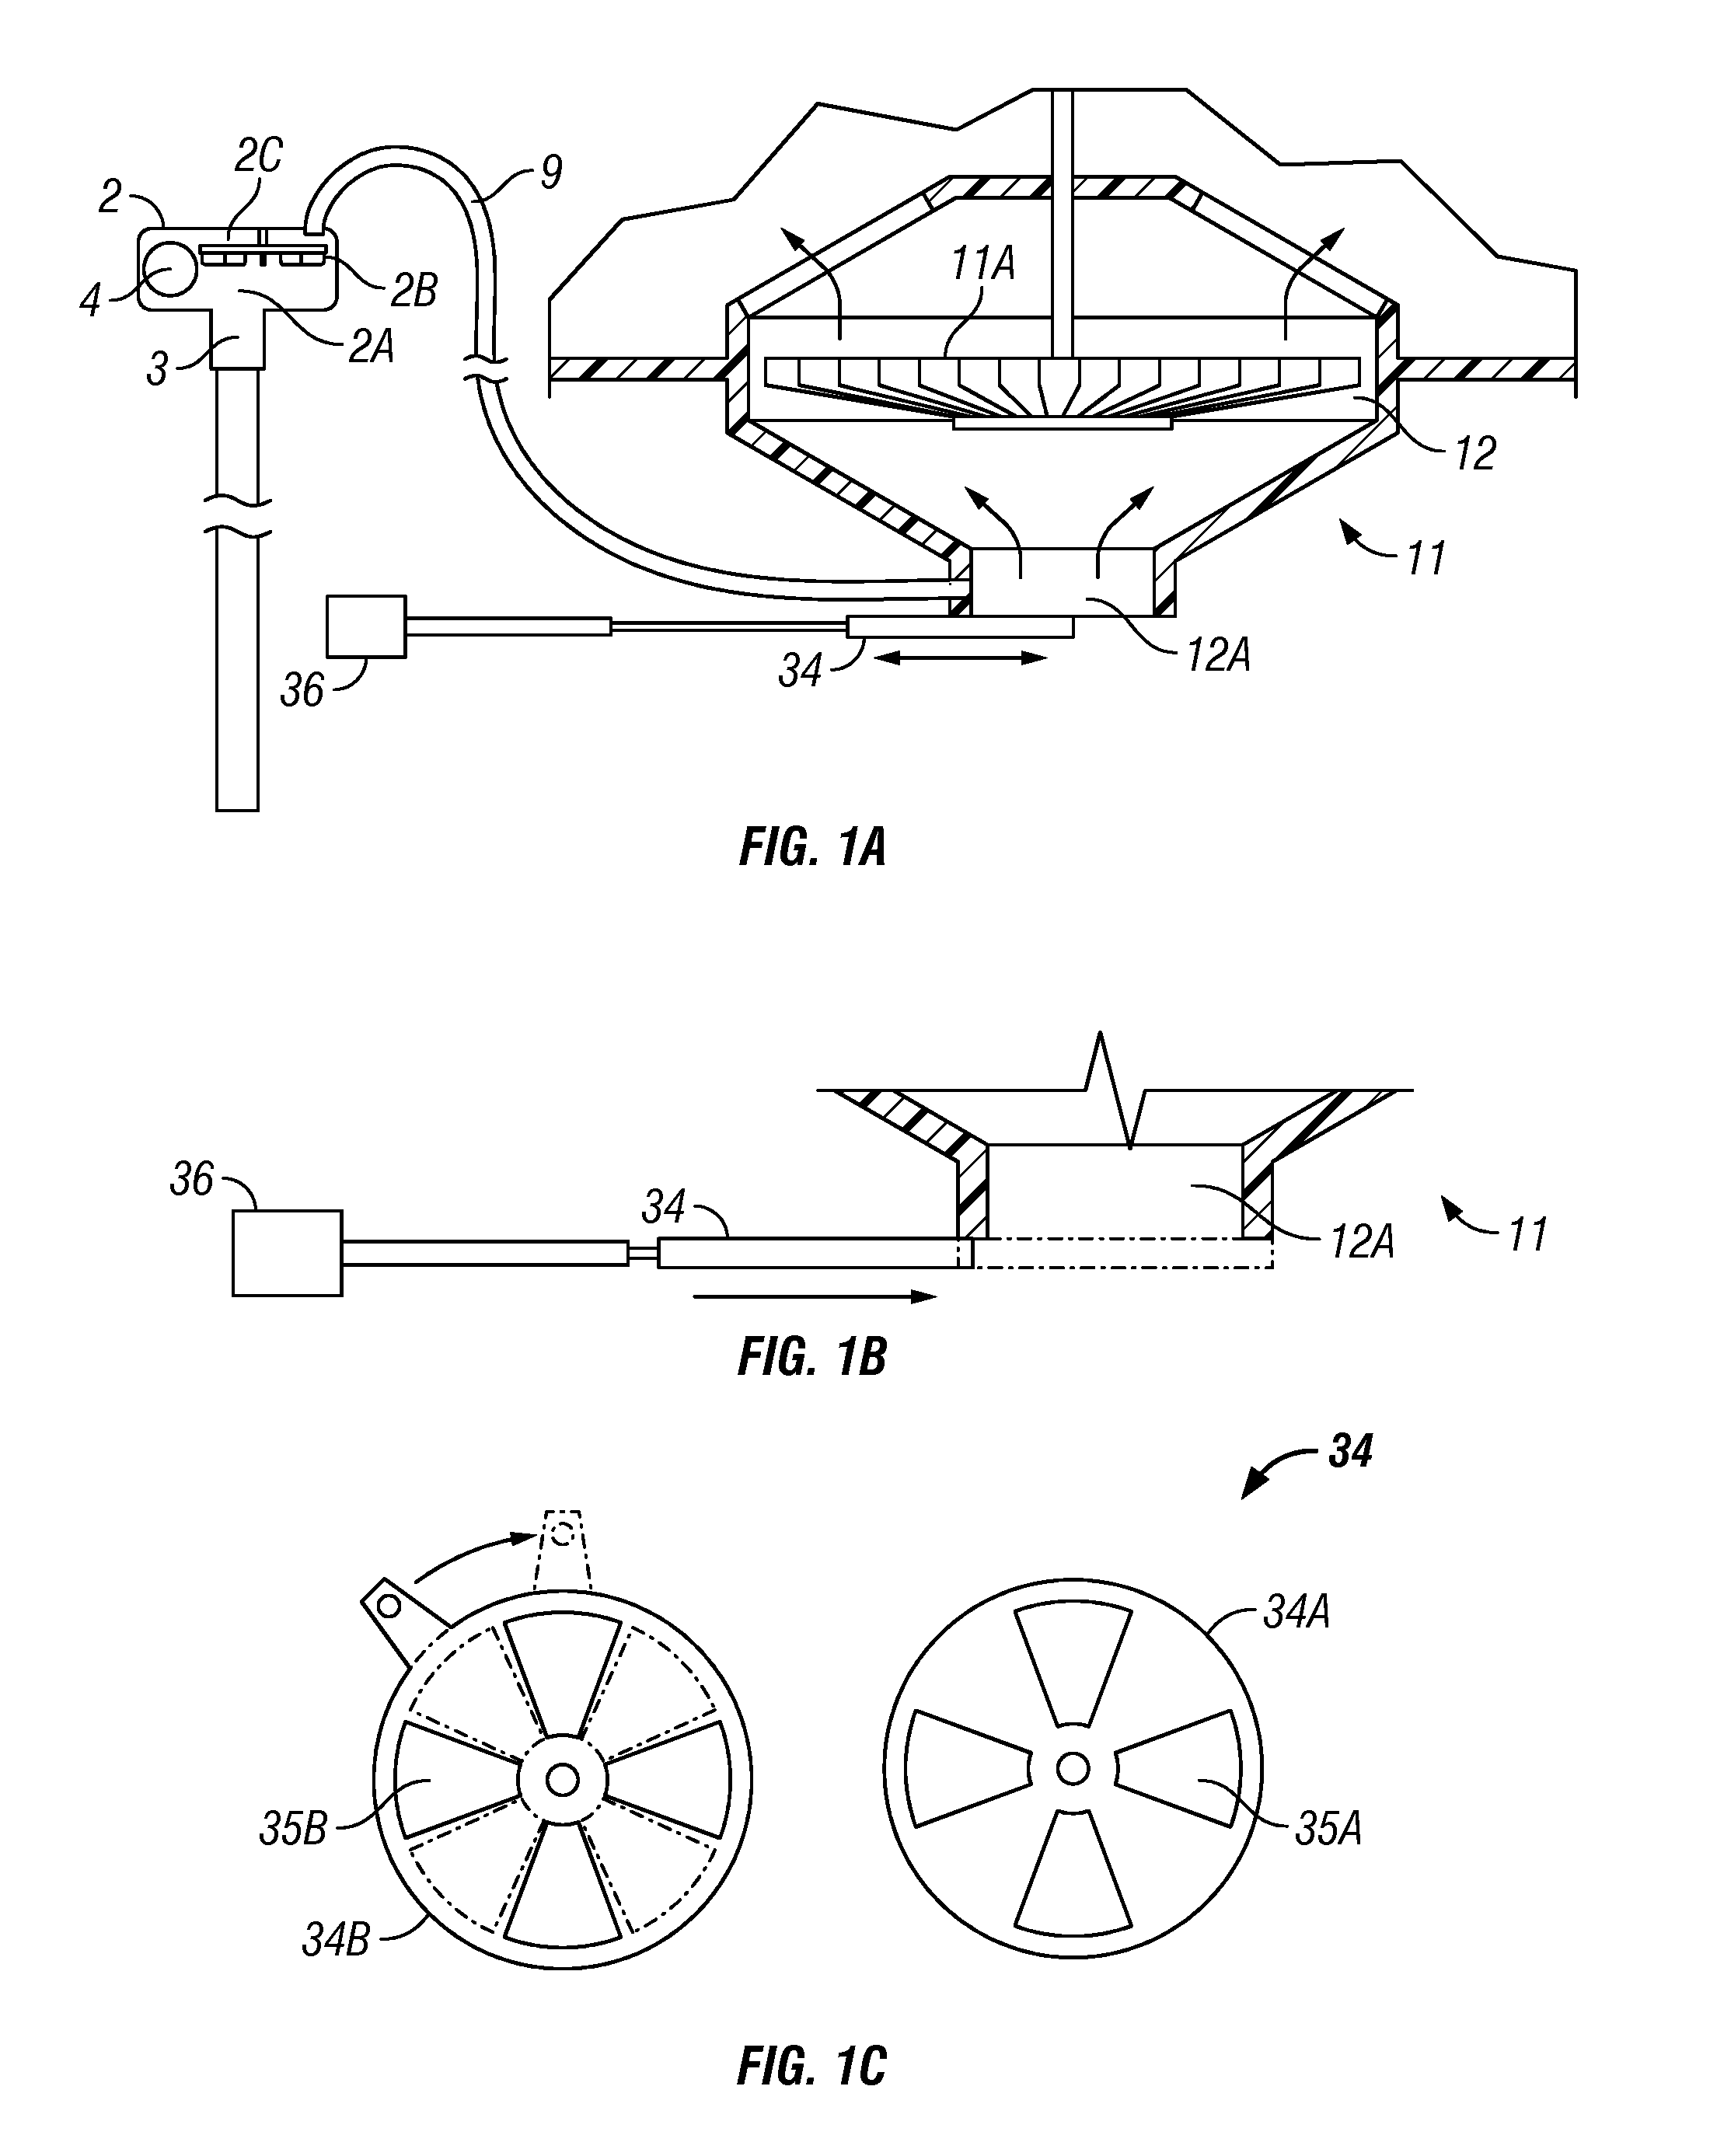 Method and apparatus of driving multiple shafts in a wet/dry vacuum and liquid pump